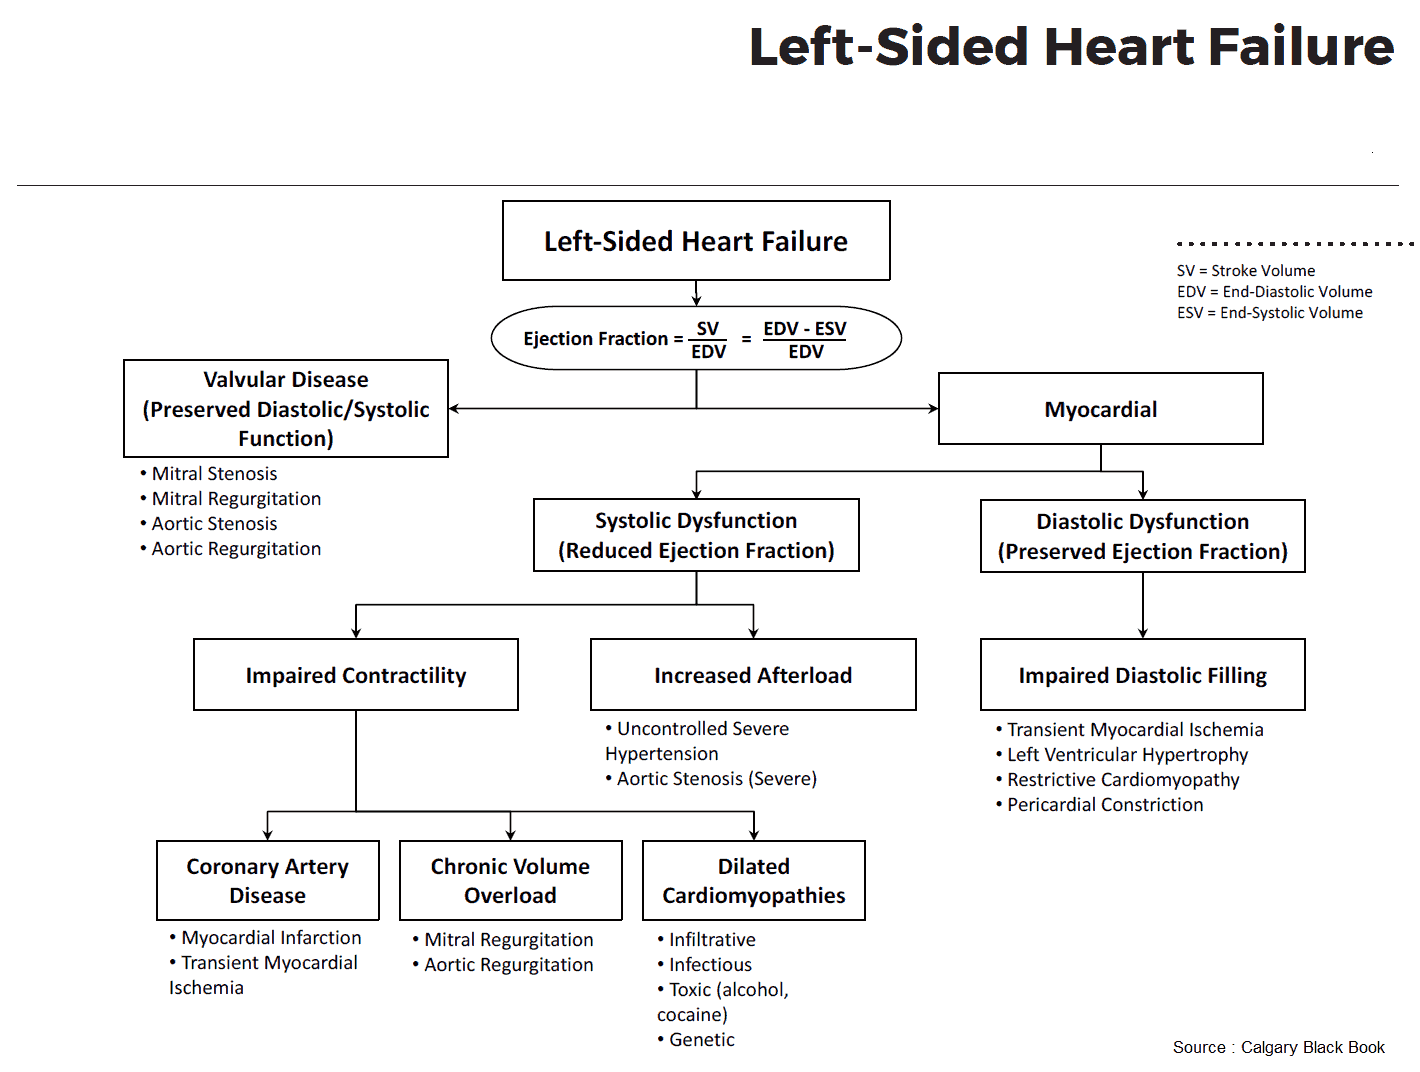 Causes of Left-Sided Heart Failure